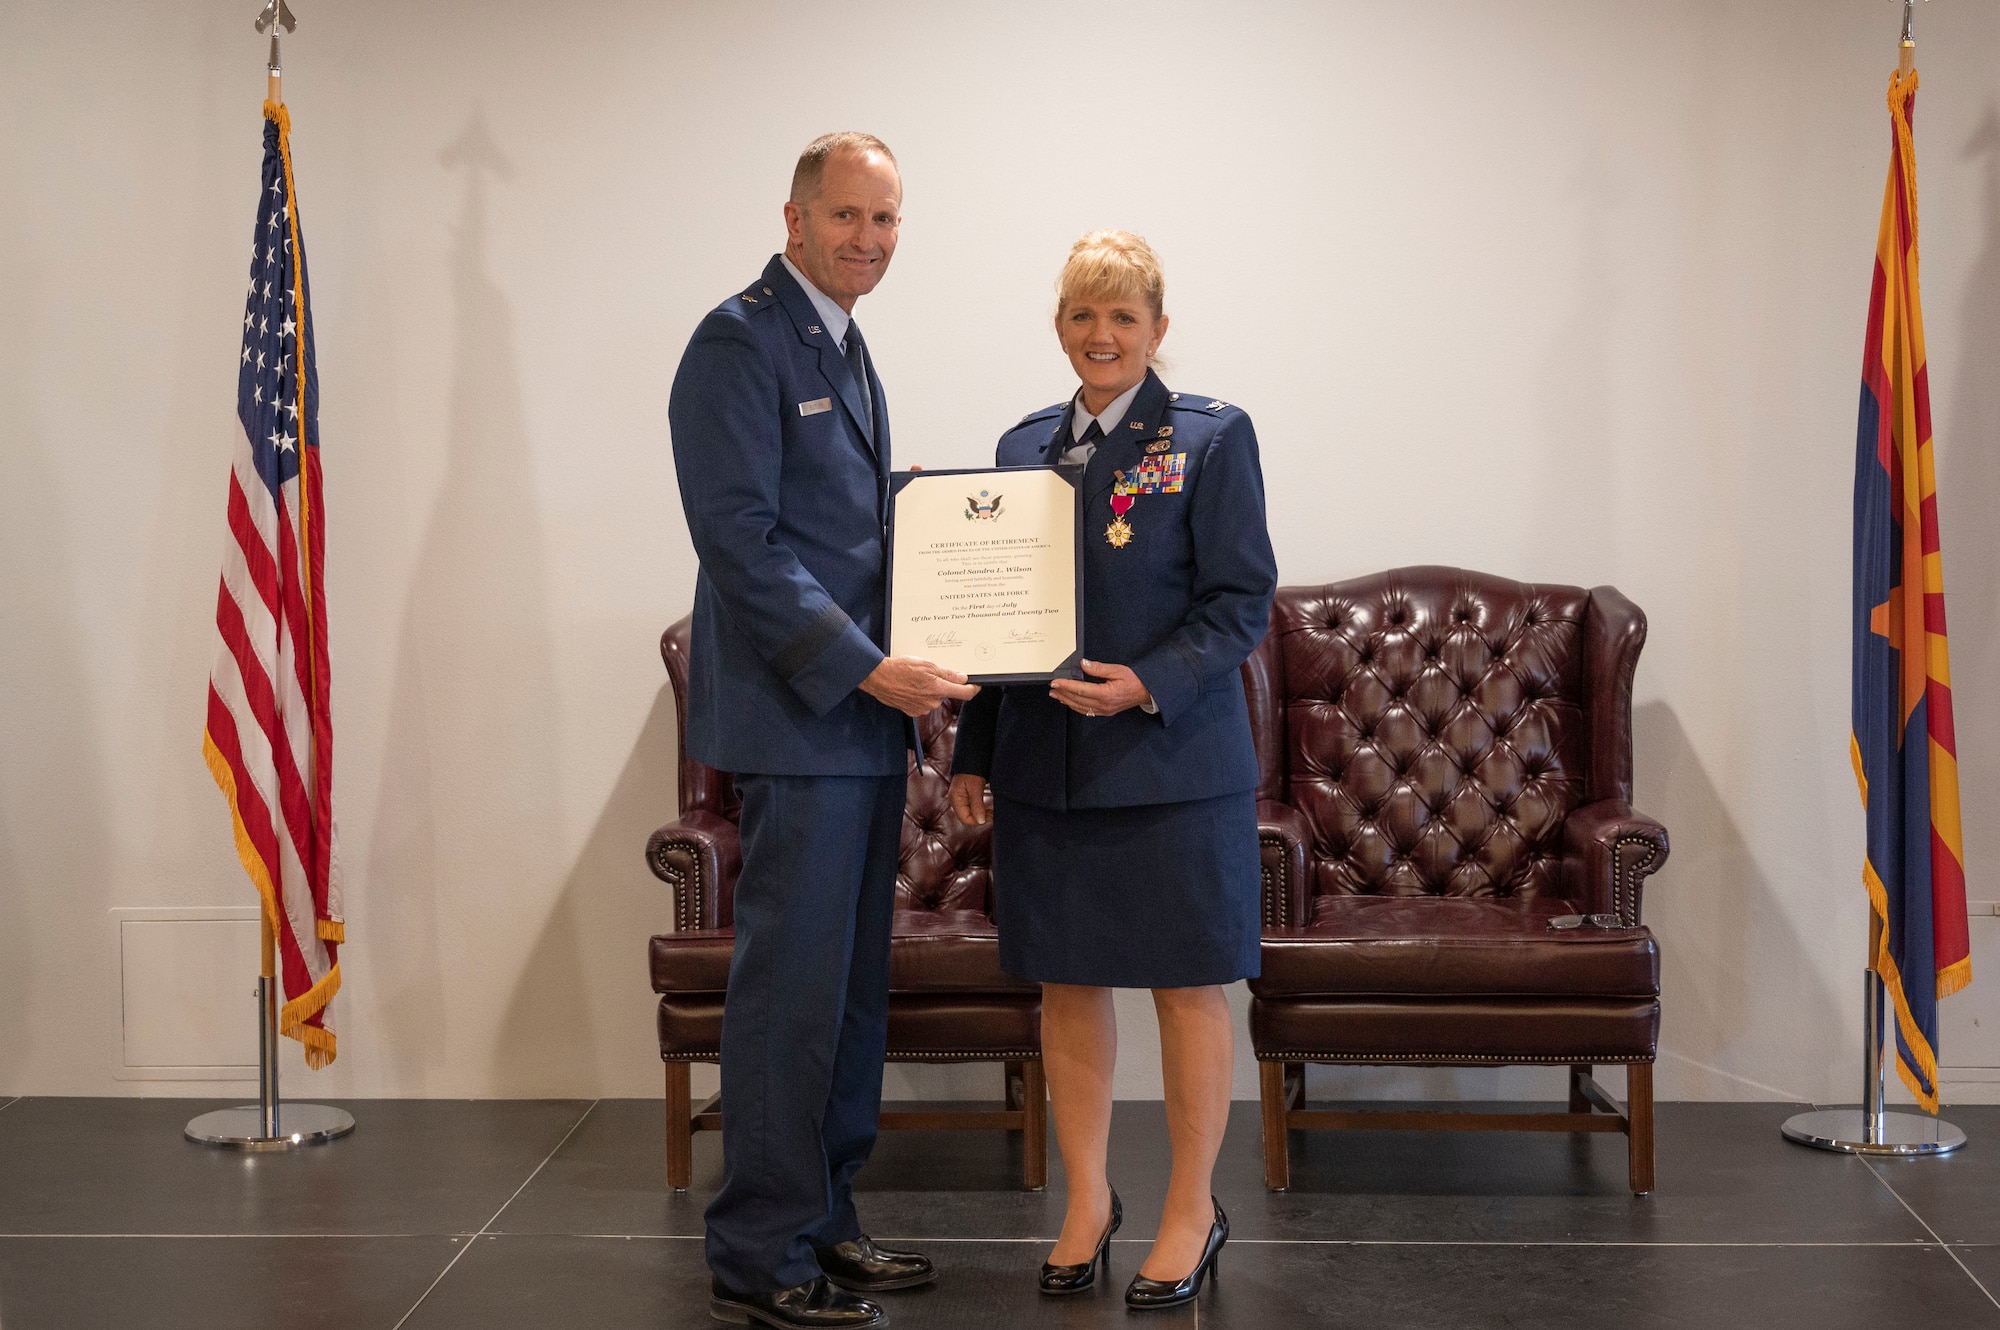 U.S. Air Force Brig. Gen. Jeffrey Butler, left, 162nd Wing Commander, presents Col. Sandra L. Wilson with a  certificate of retirement at Morris Air National Guard Base, May 14, 2022. (Air National Guard photo by Senior Master Sgt. Charles Givens)